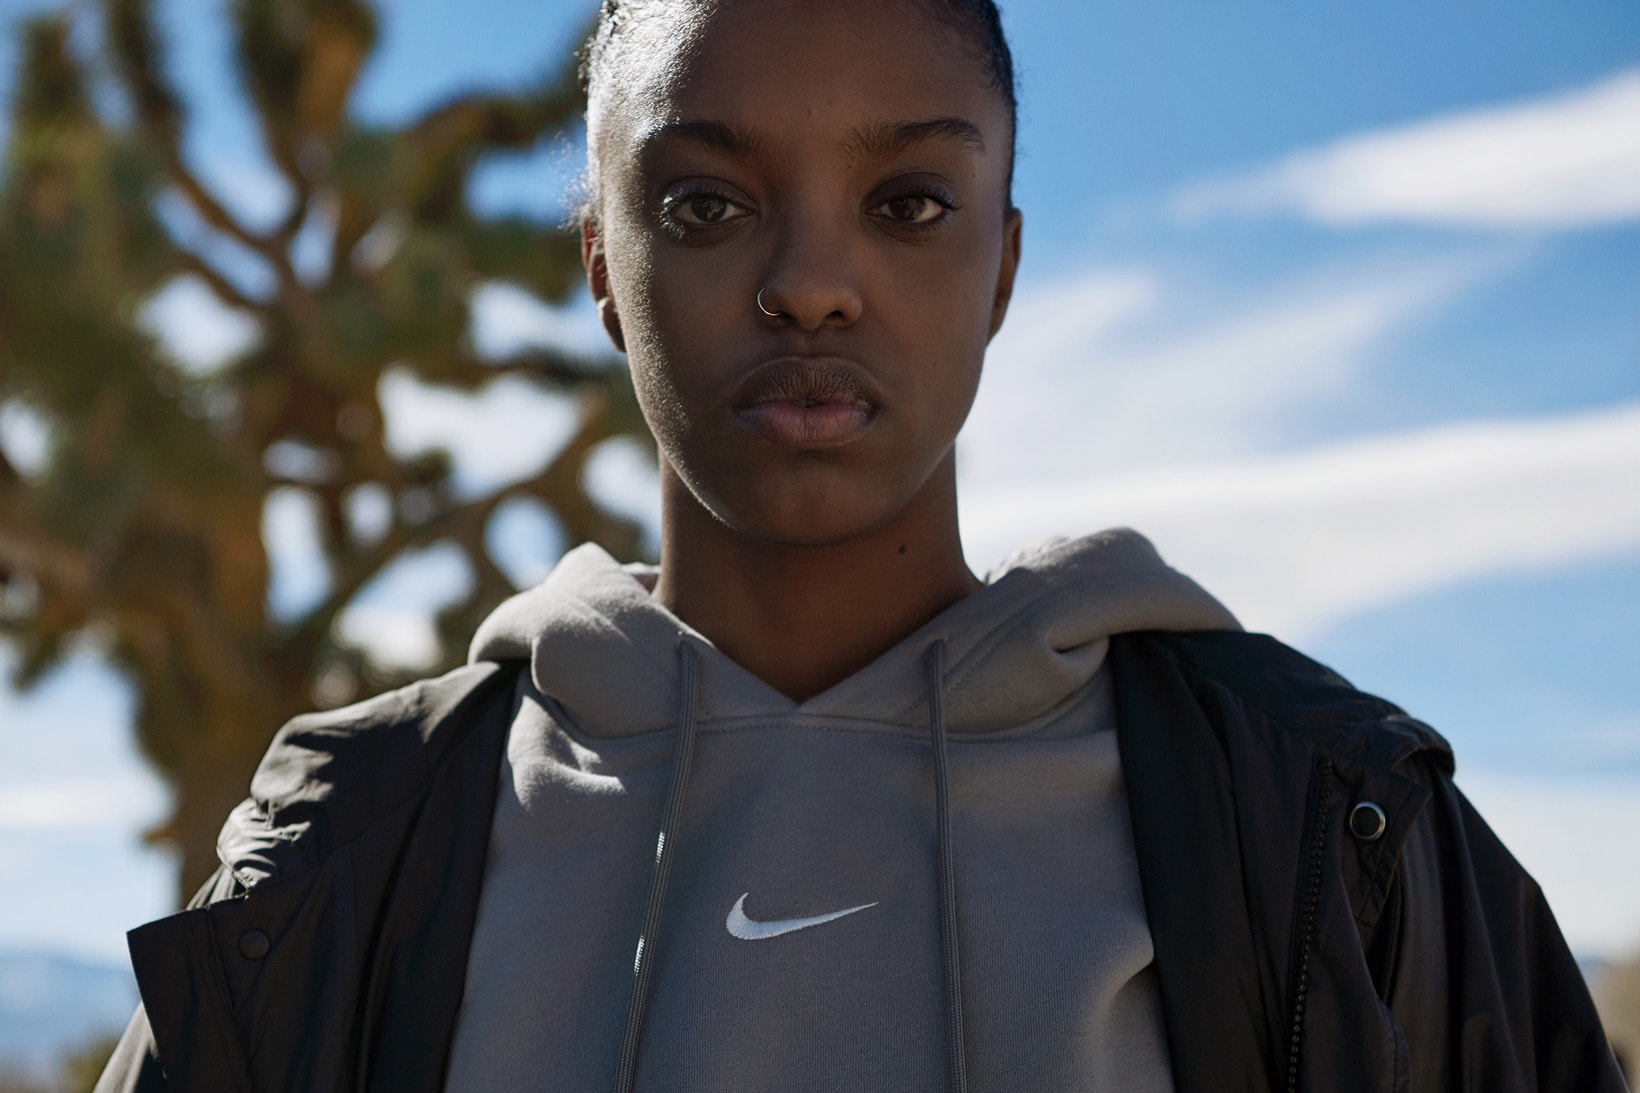 Fear of God x Nike Spring Summer 2019 Collection Sweater Grey Jacket Black